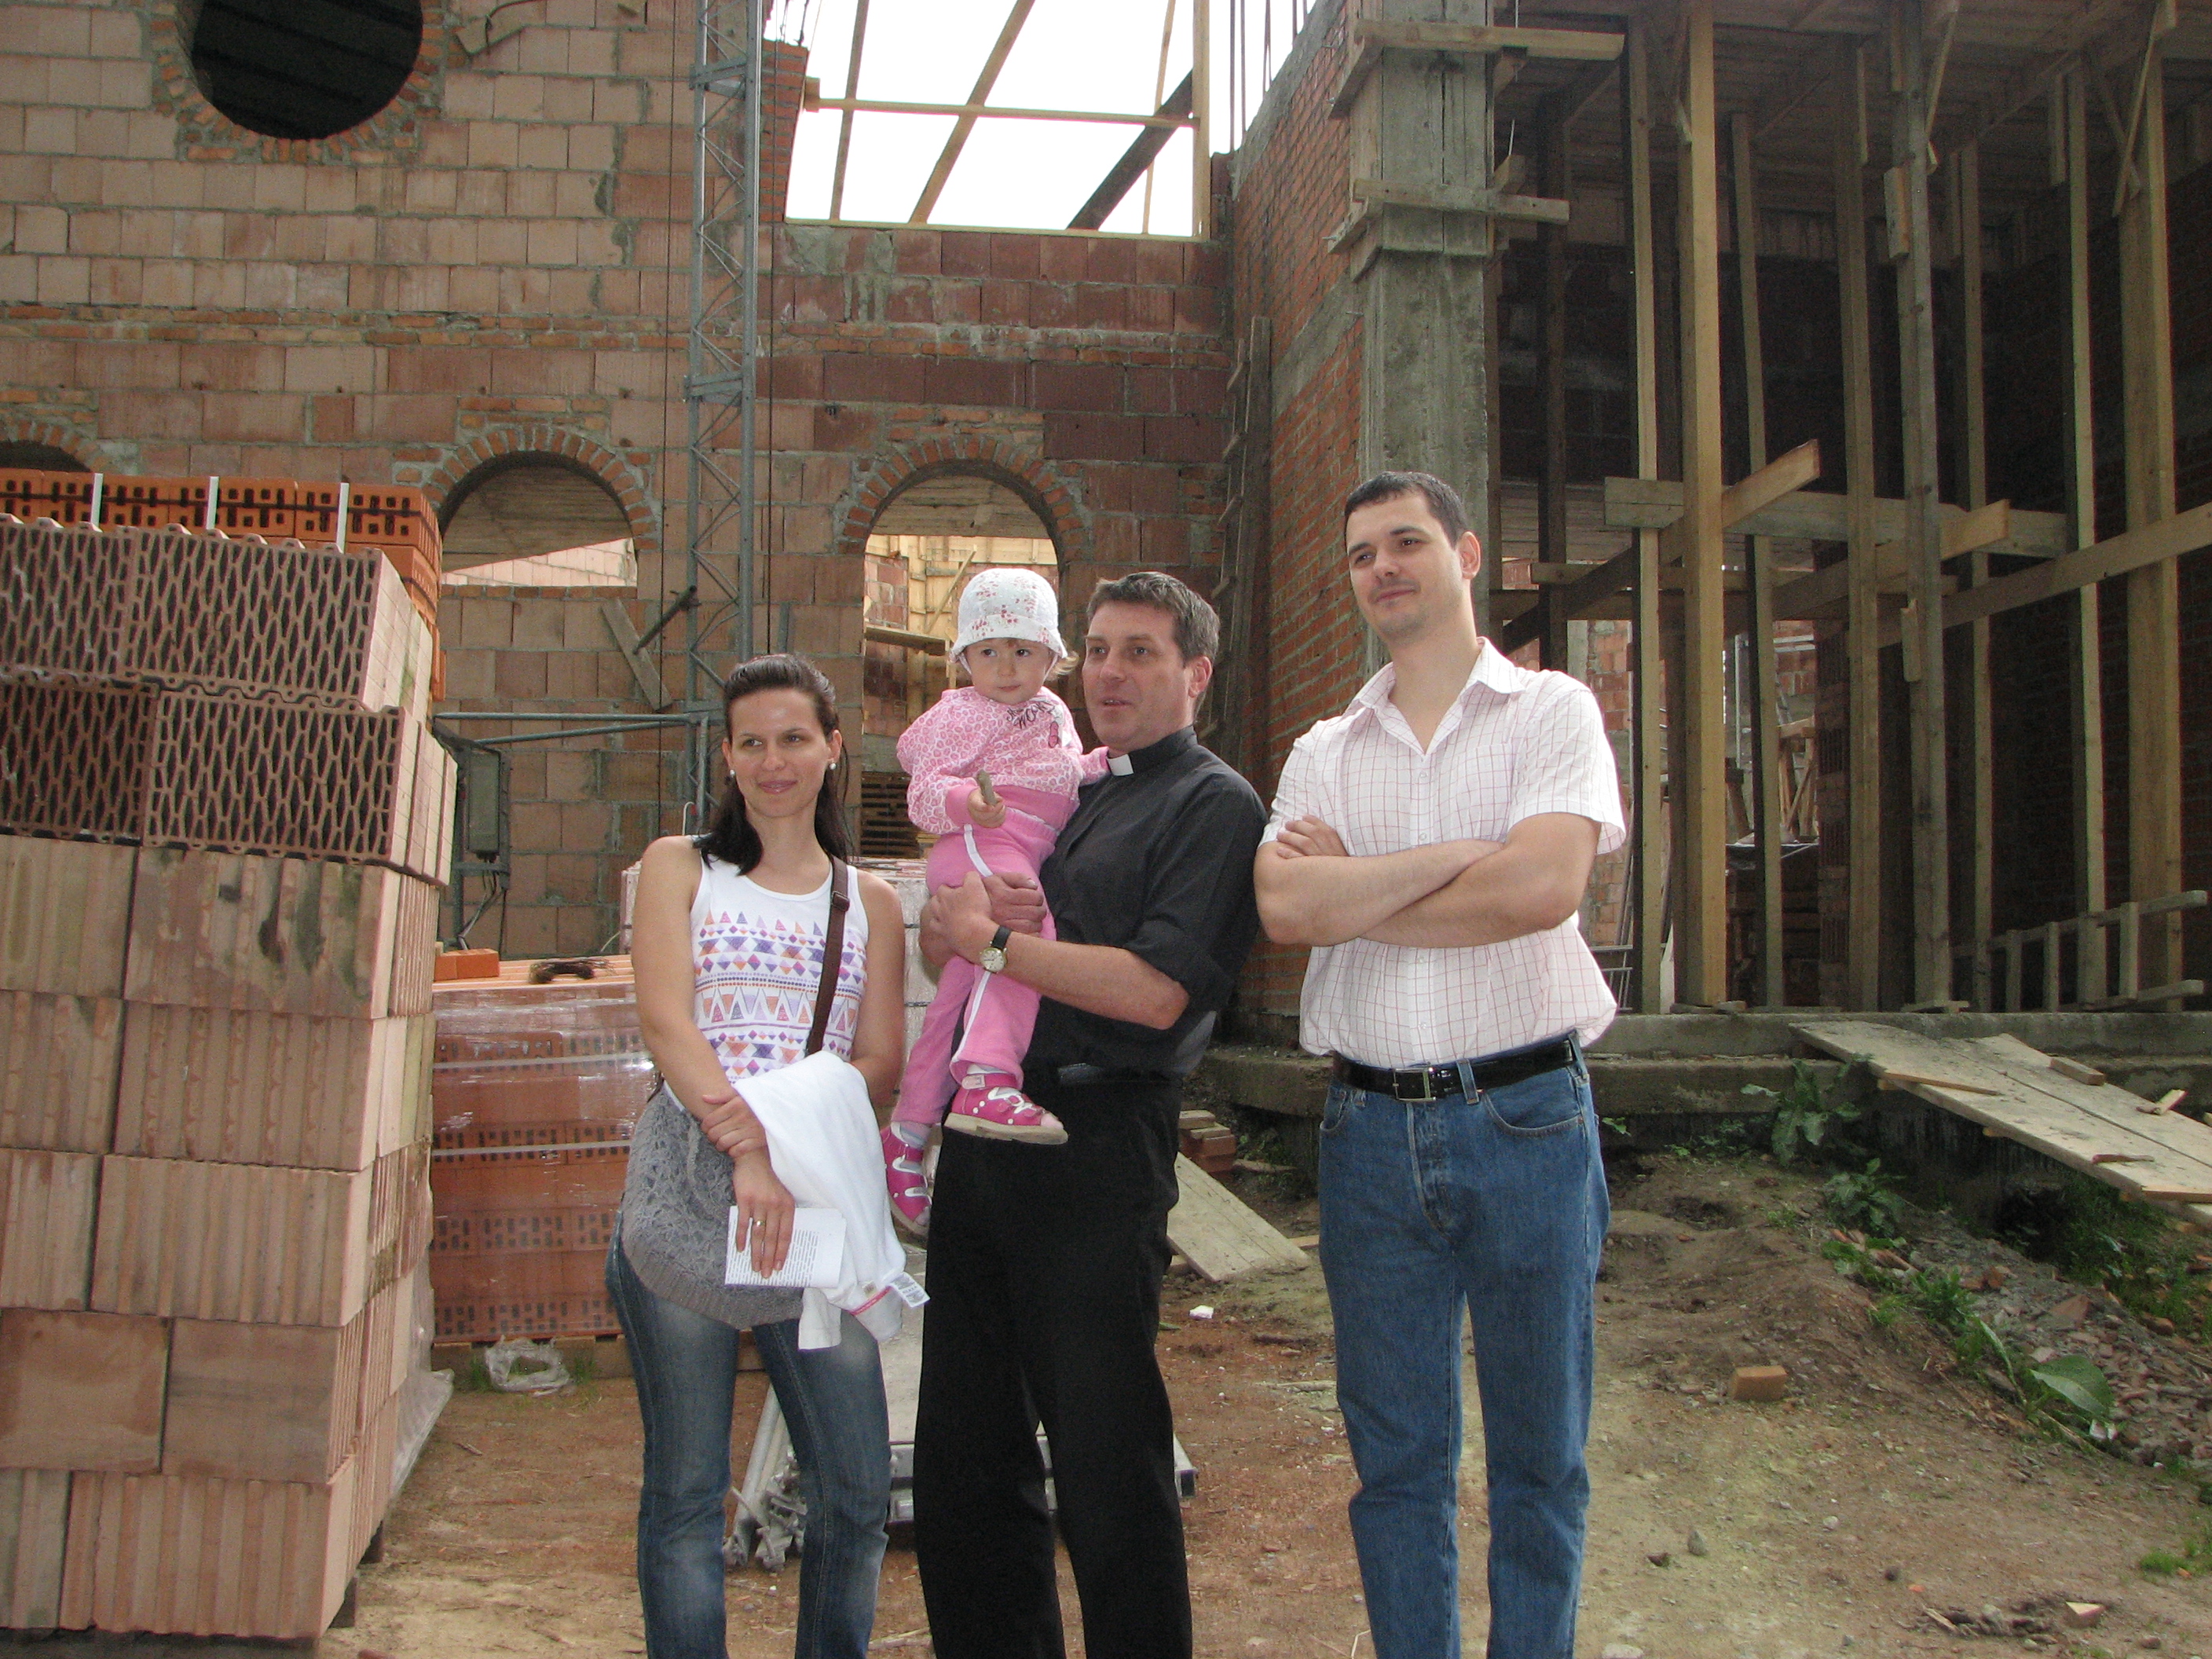 A Catholic priest (in the middle) with a young family near a Church which is being built, pic 2